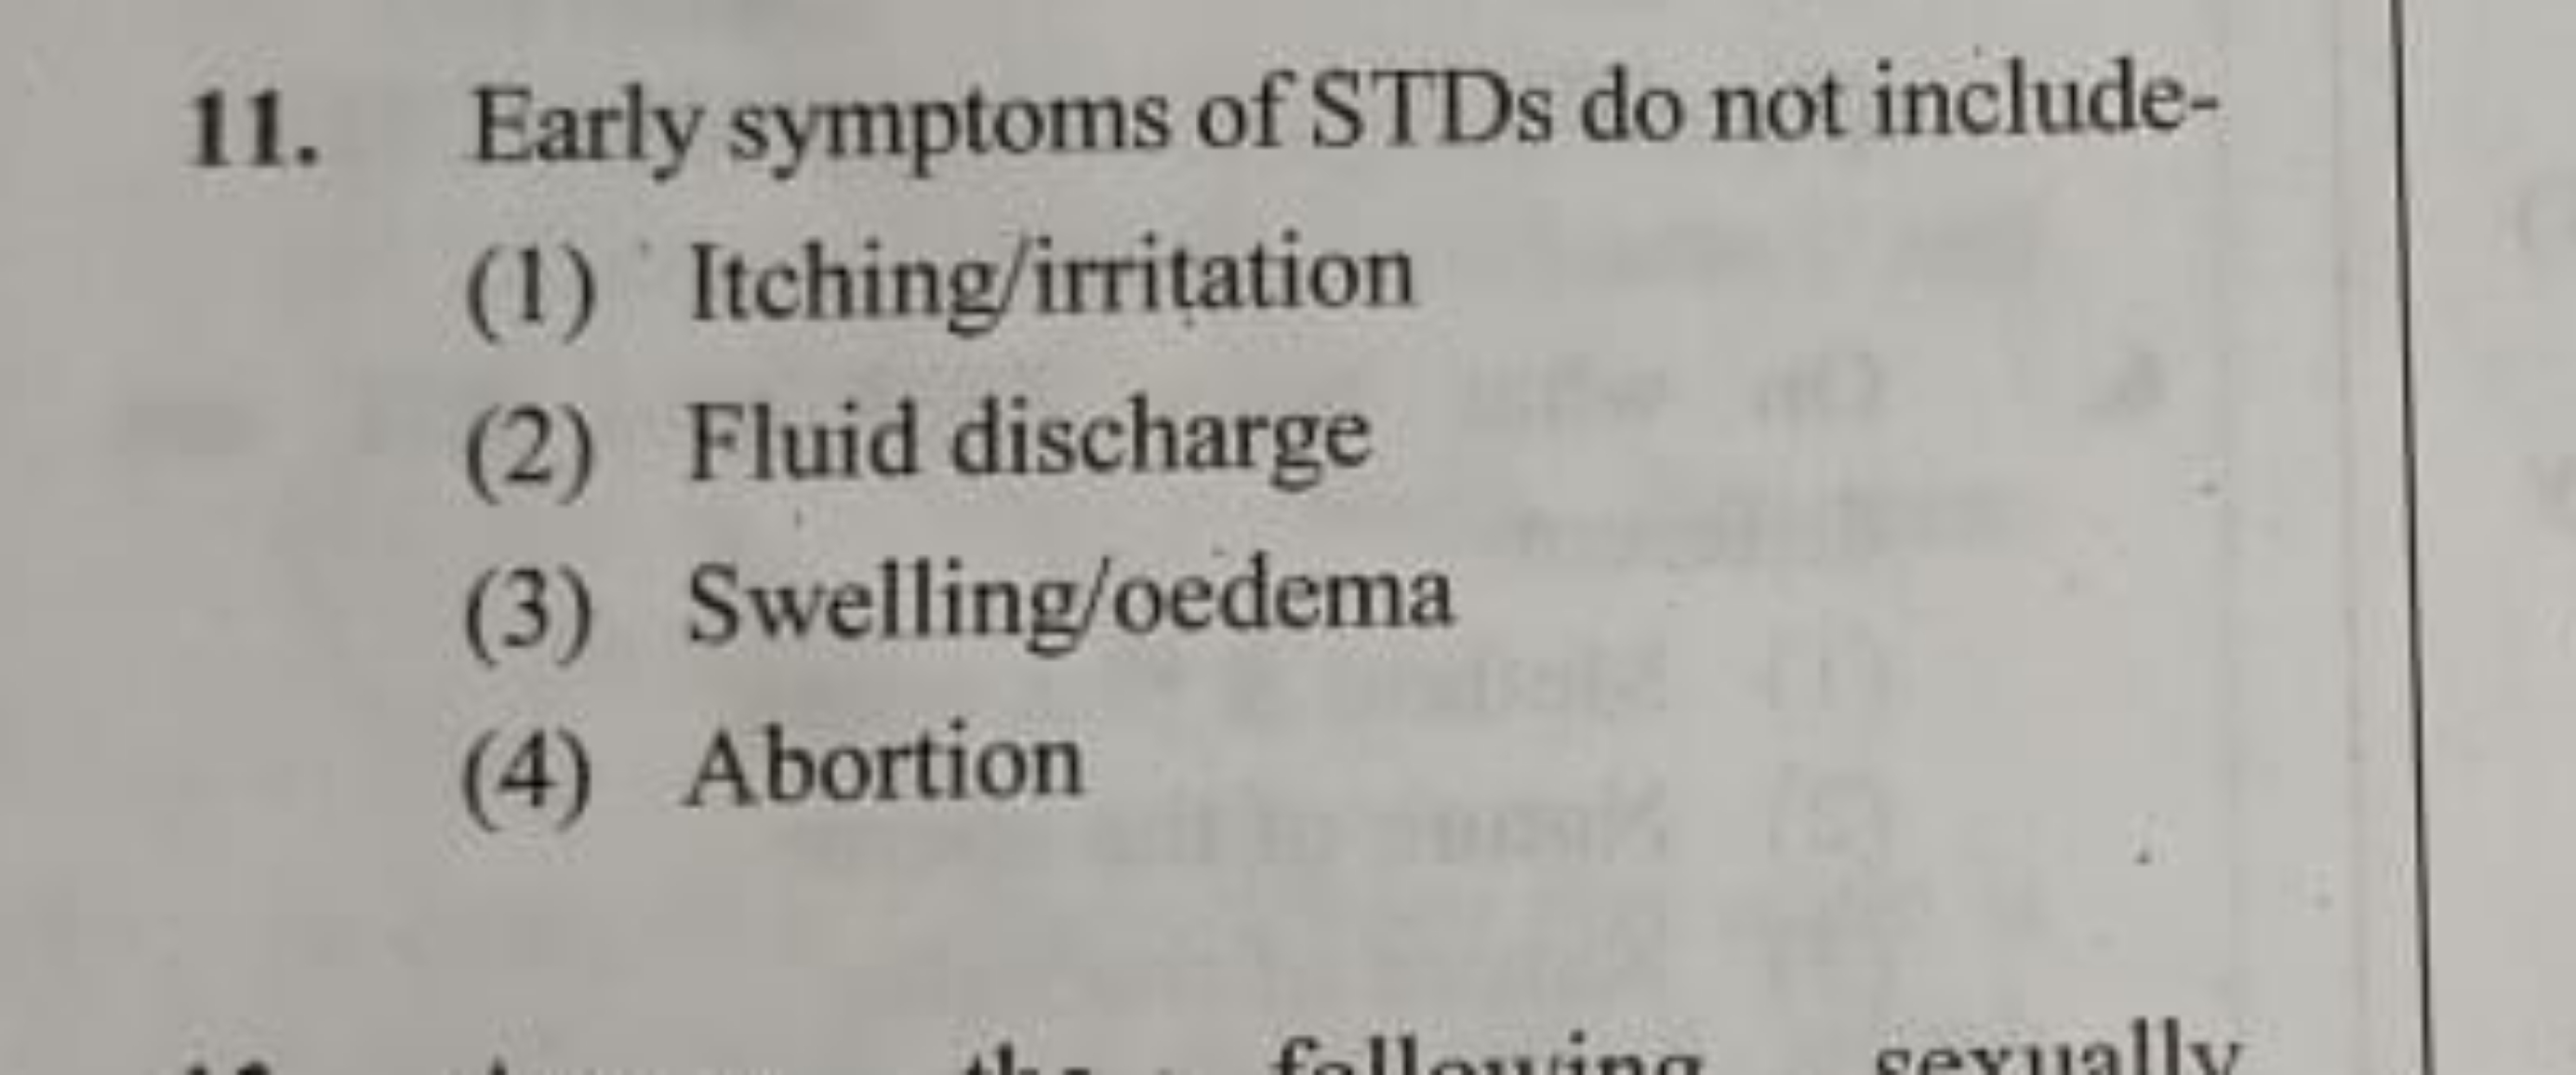 Early symptoms of STDs do not include-